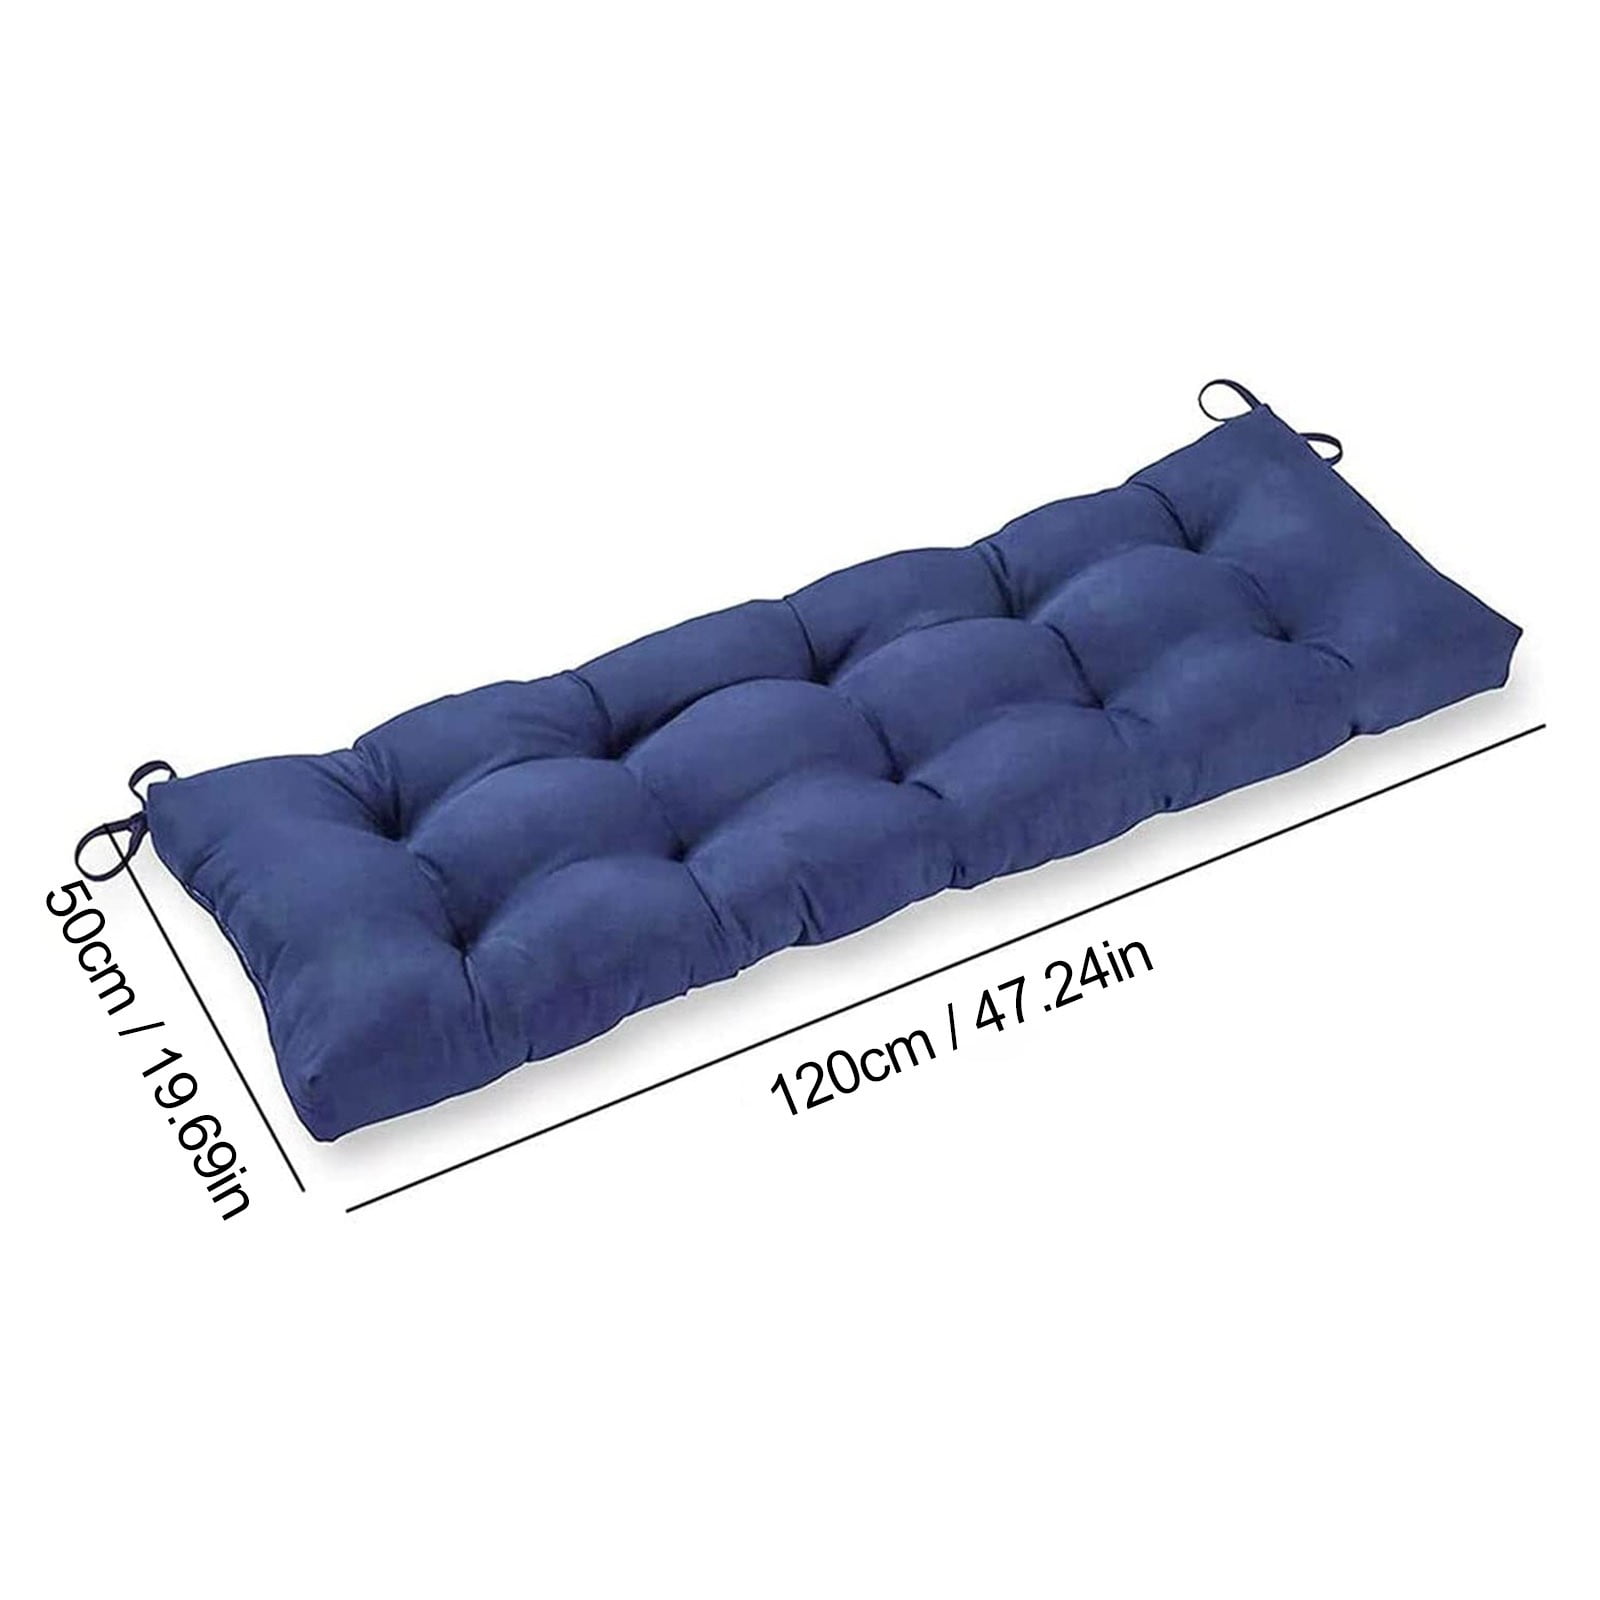 for Lounger Garden Furniture Patio Lounger Bench 120x50cm/47x19in ndoor/Outdoor Bench Cushion,Garden Bench Cushion,Cotton Cushion Loveseat Cushion,Soft Thick and Comfy Swing Chair Replacement Seat Pads Cushion Black 